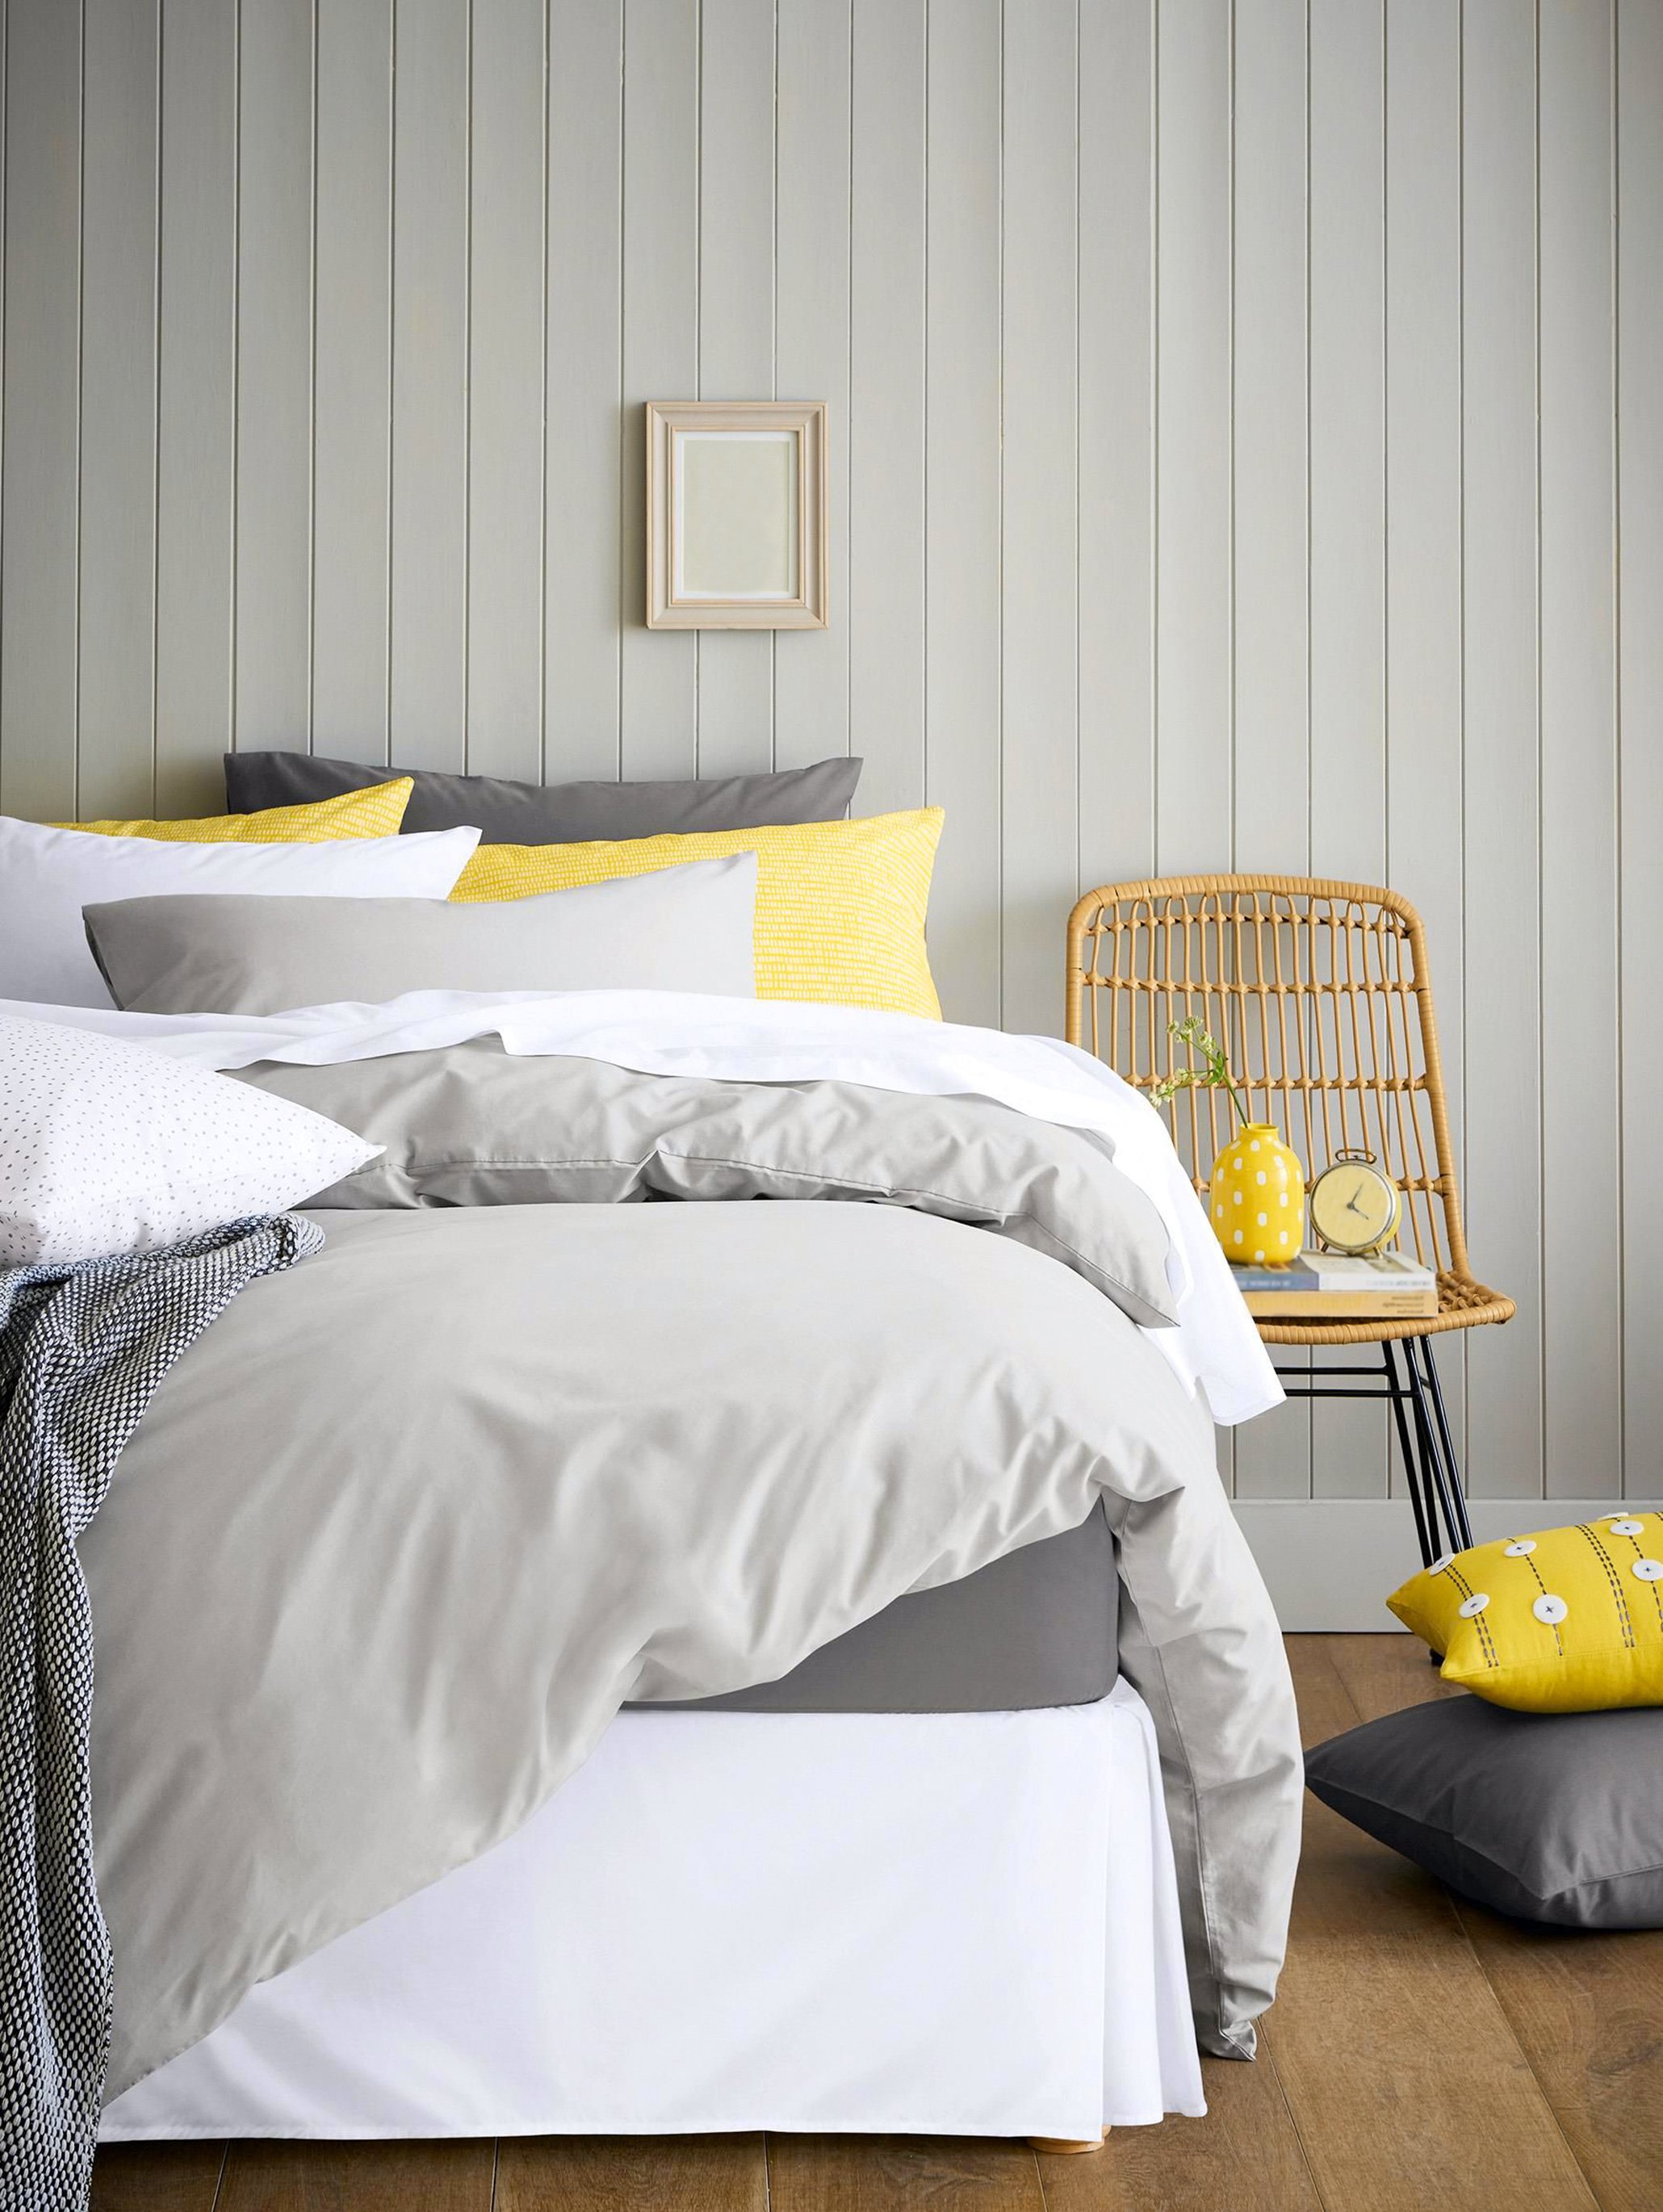 Bed with a grey comforter and white, grey, and yellow pillows.